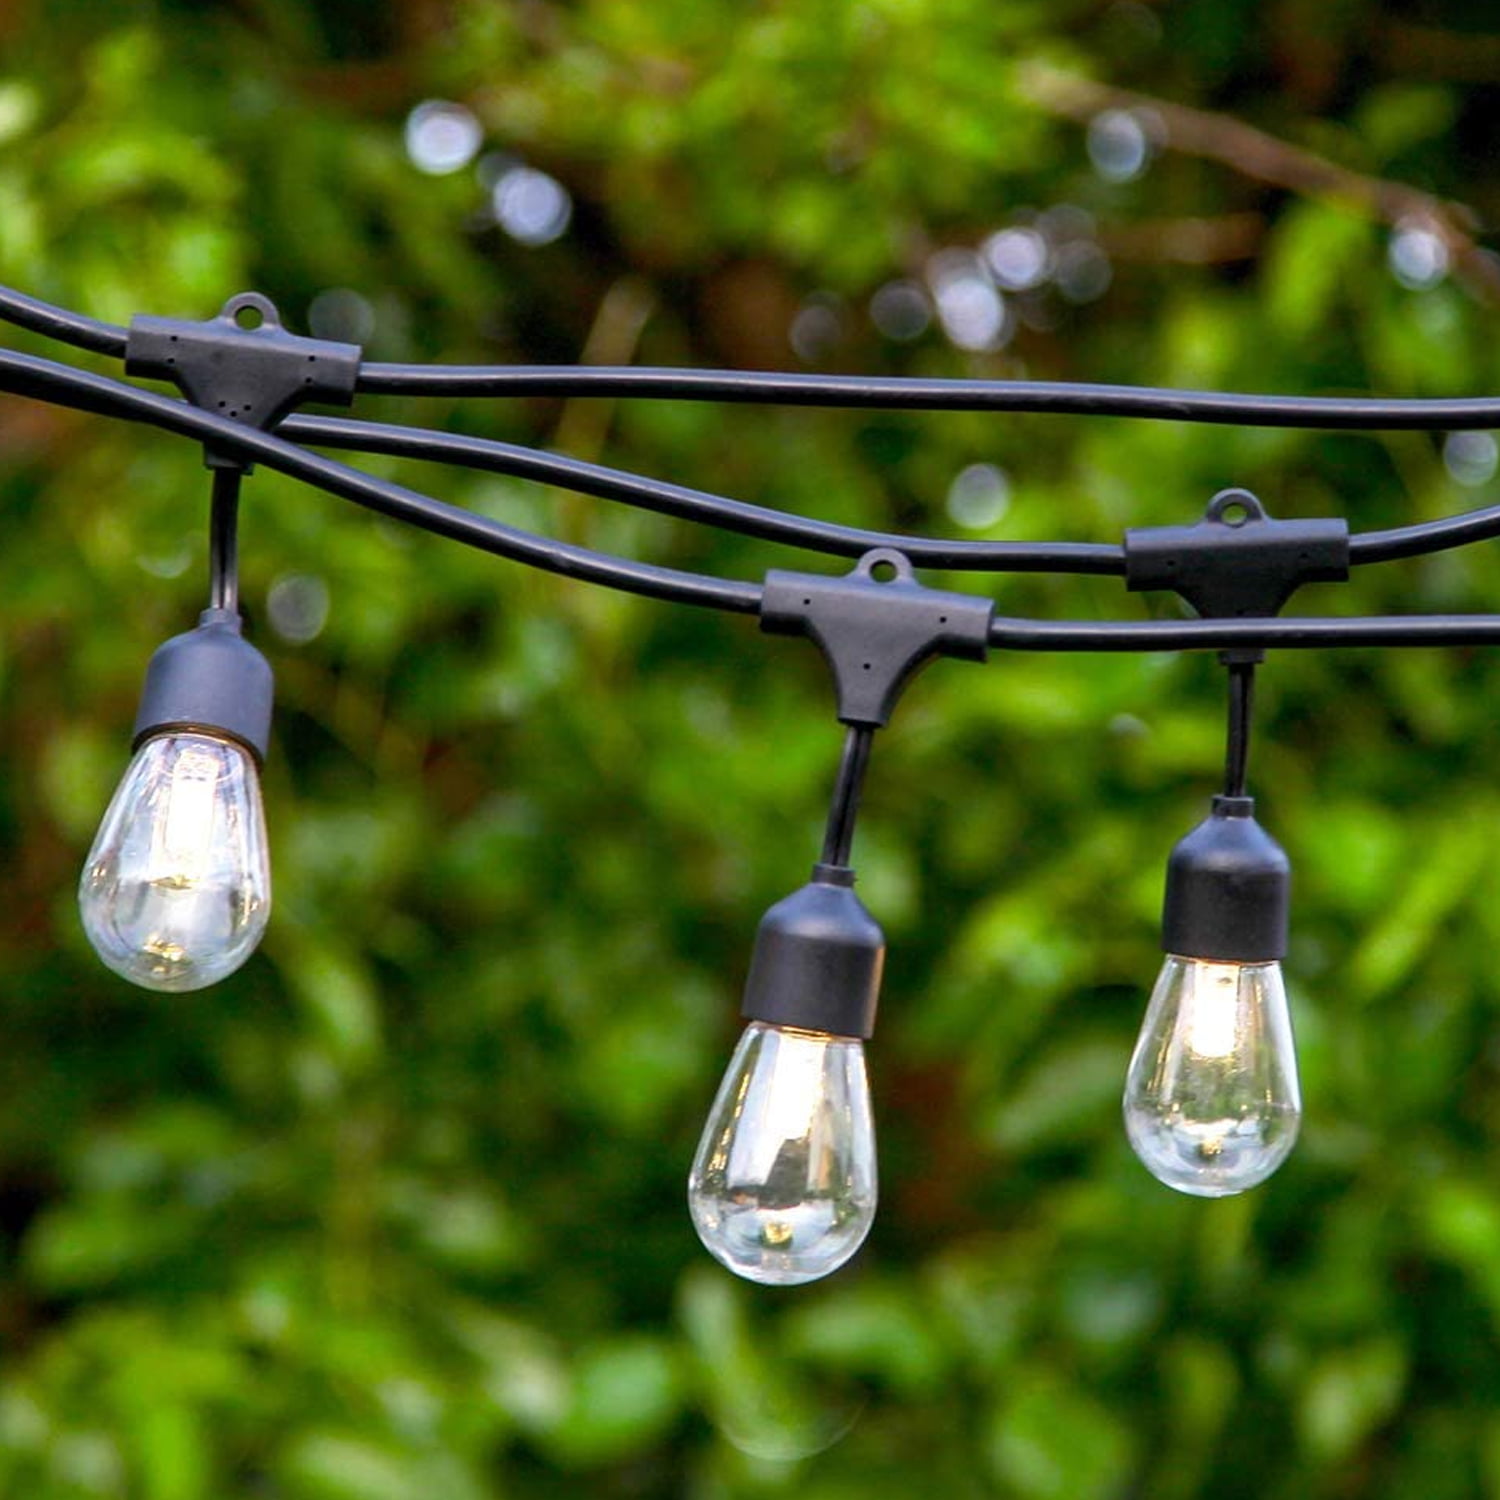 Brightech Ambience Pro Solar Power Led, Brightech Vintage Outdoor Solar String Lights